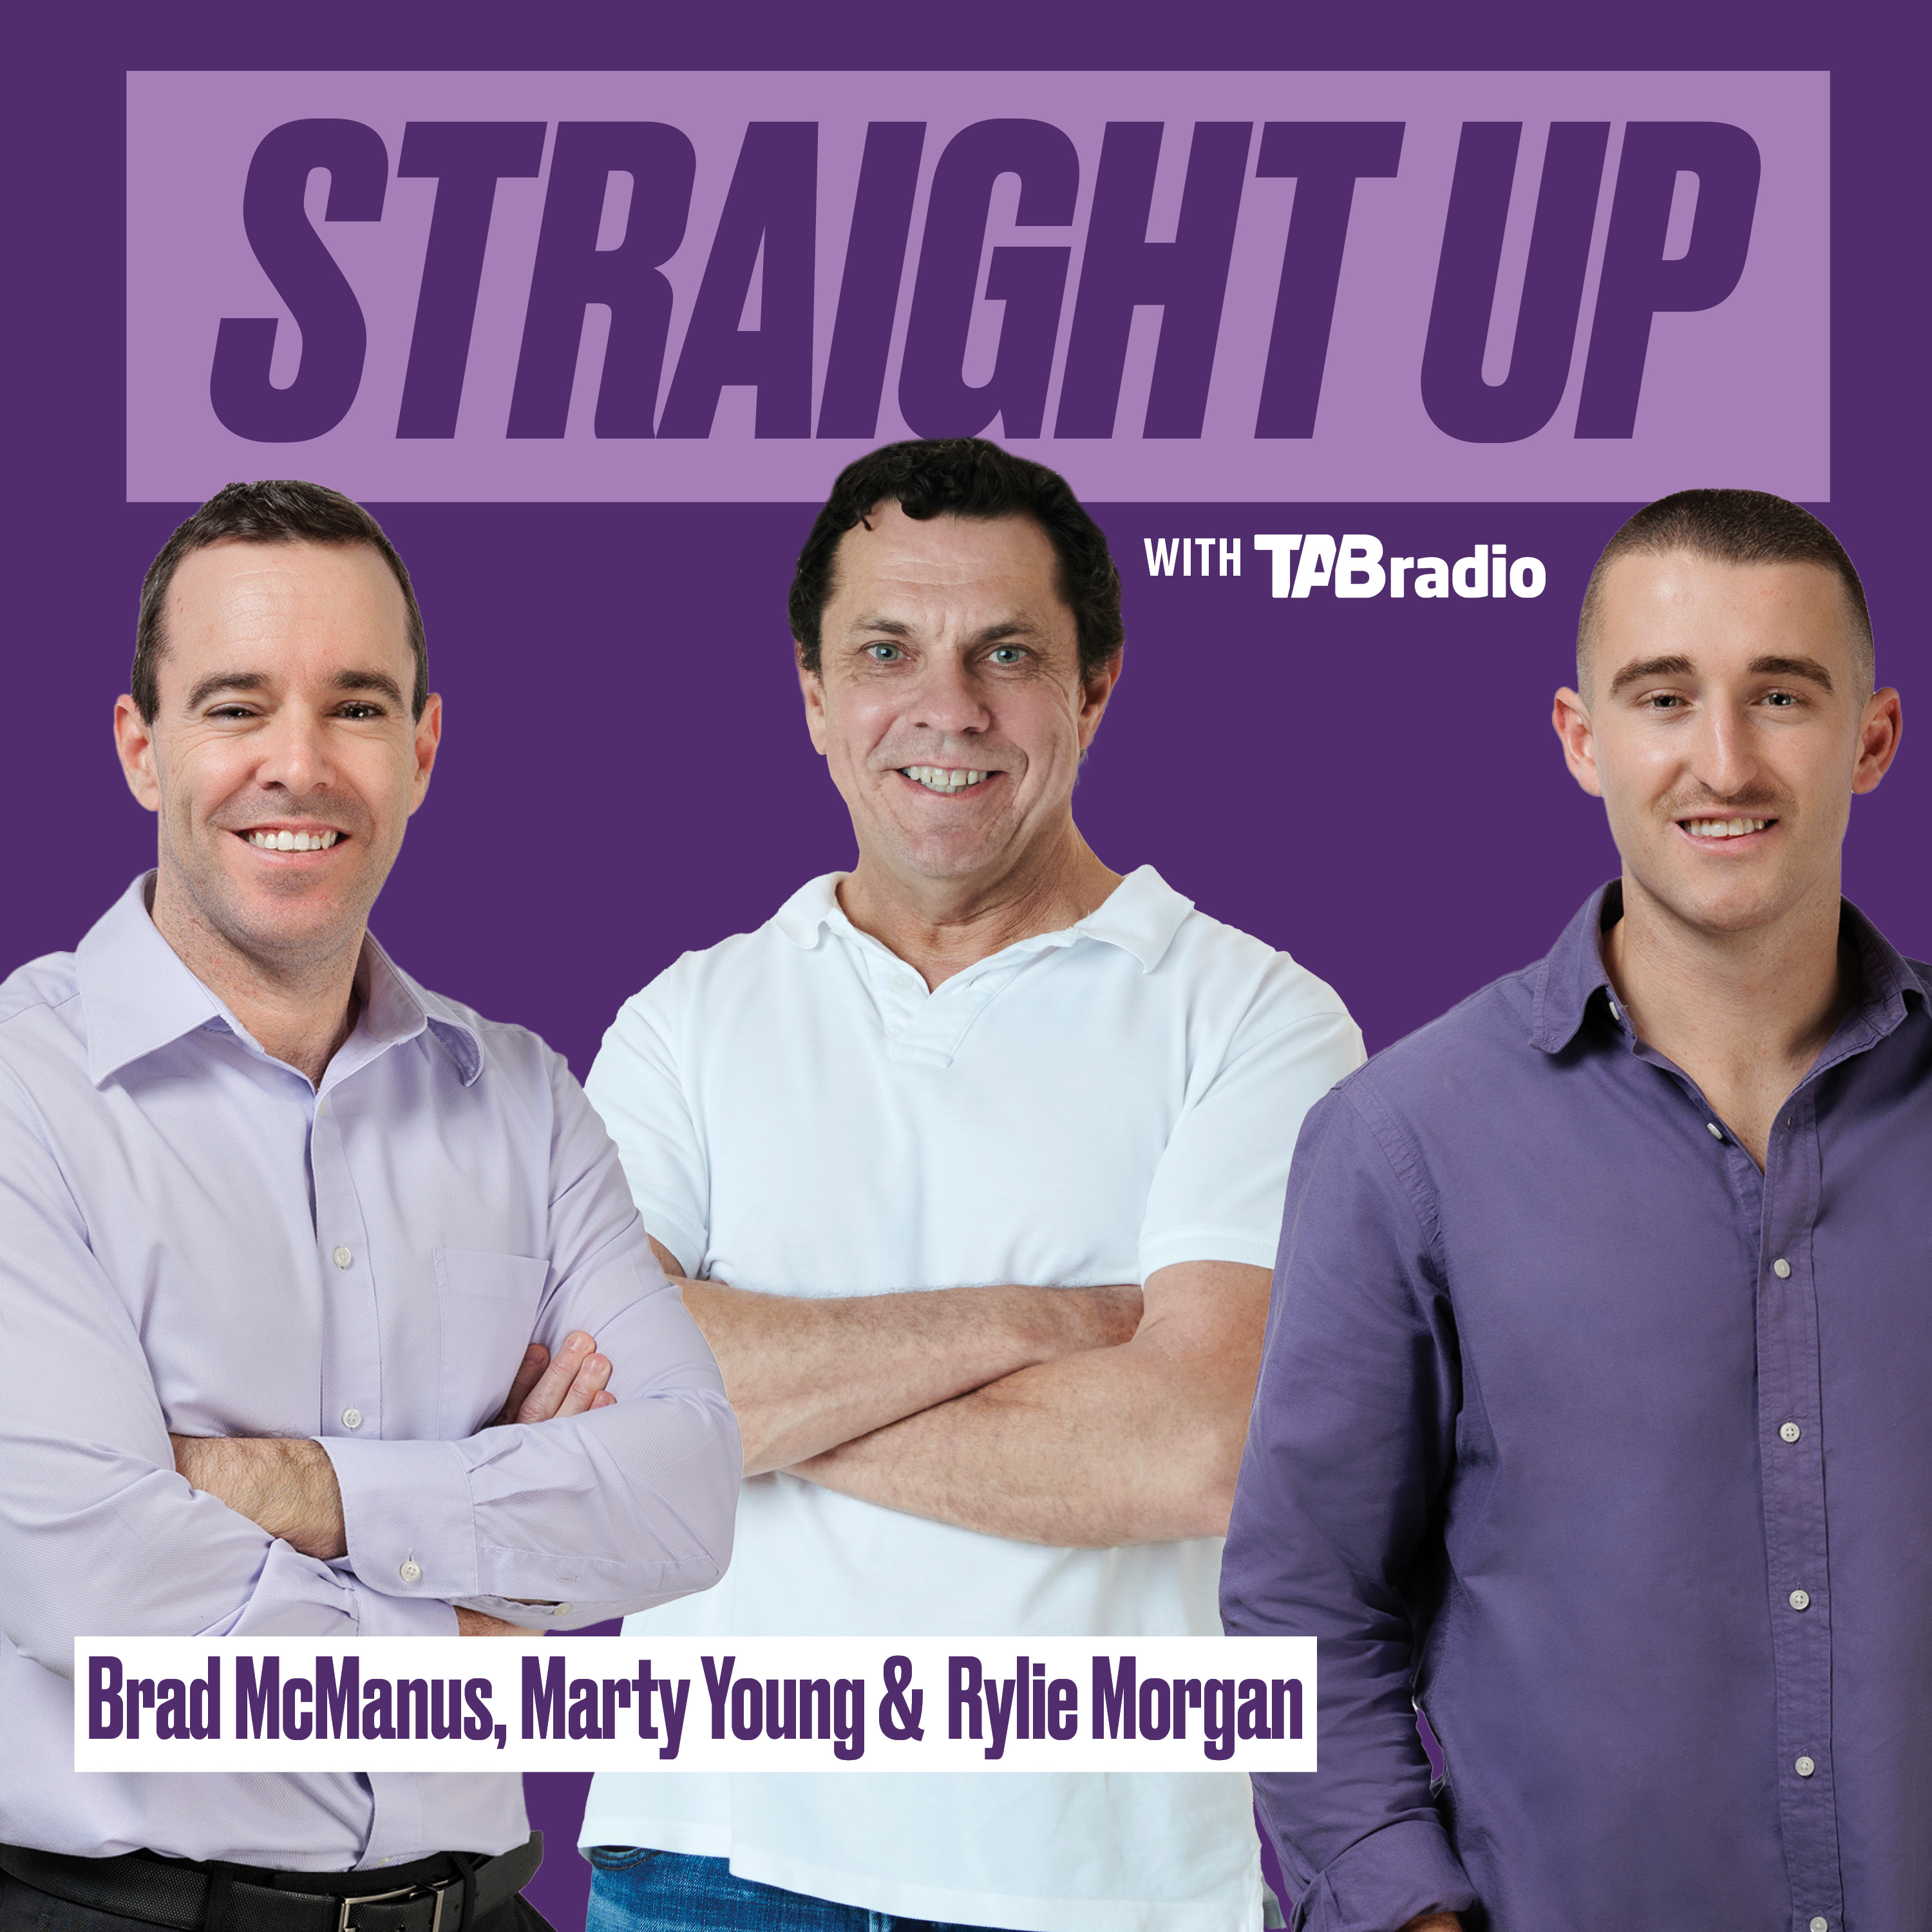 Episode 40 - Straight Up with TABradio - Marty Young, Rylie Morgan & Brad McManus